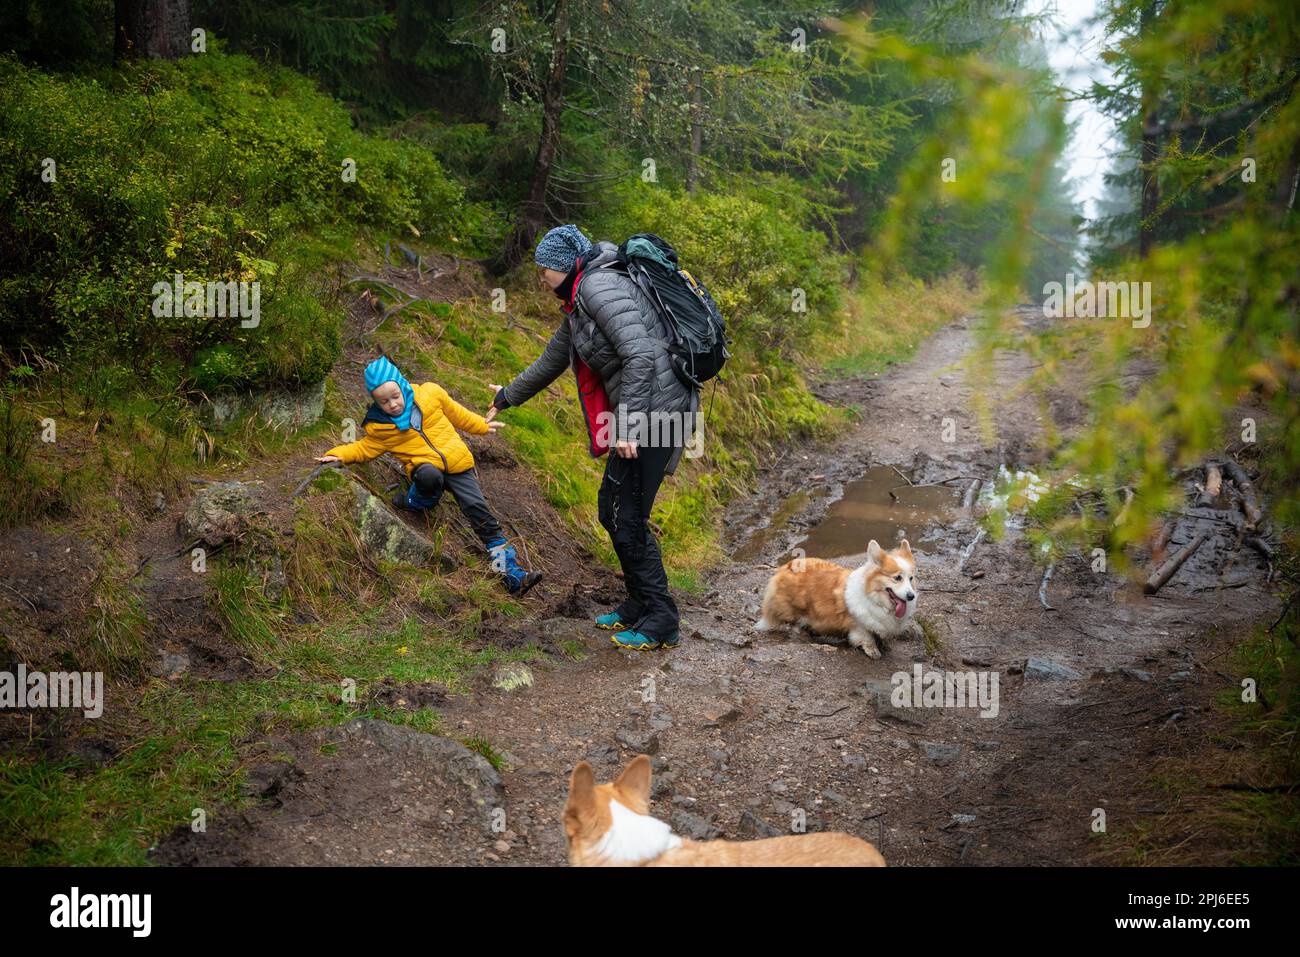 The child slipped and fell on the sloping, wet ground. Polish mountains, Poland, Europe Stock Photo